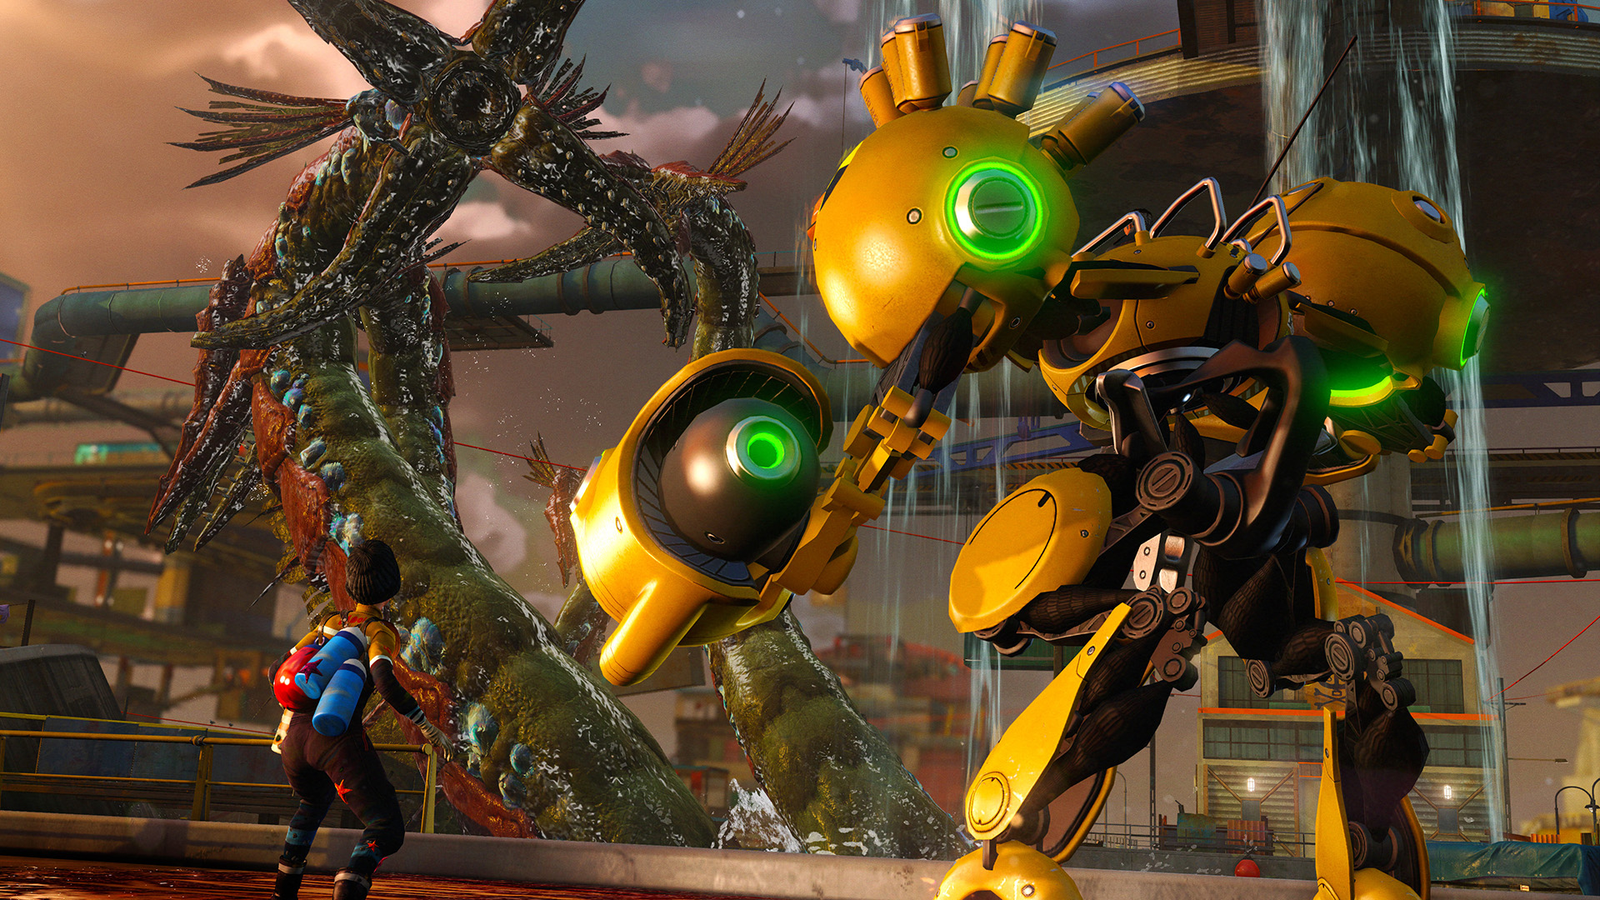 Join the 'Chaos Squad' in Sunset Overdrive's multiplayer trailer